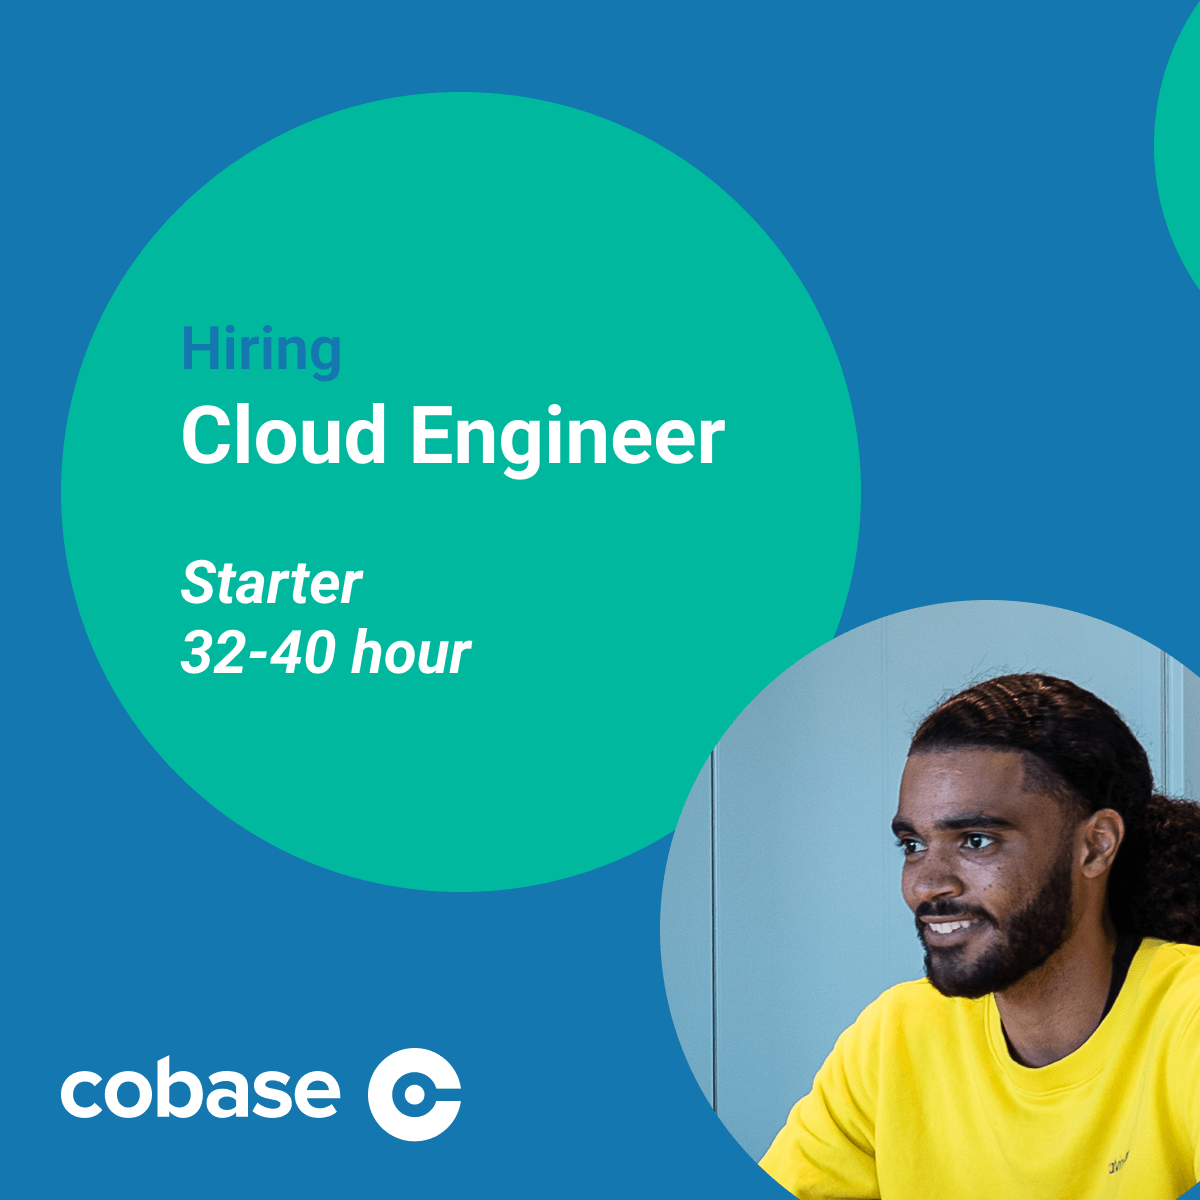 Cloud Engineer (Starting position) (1) (1)